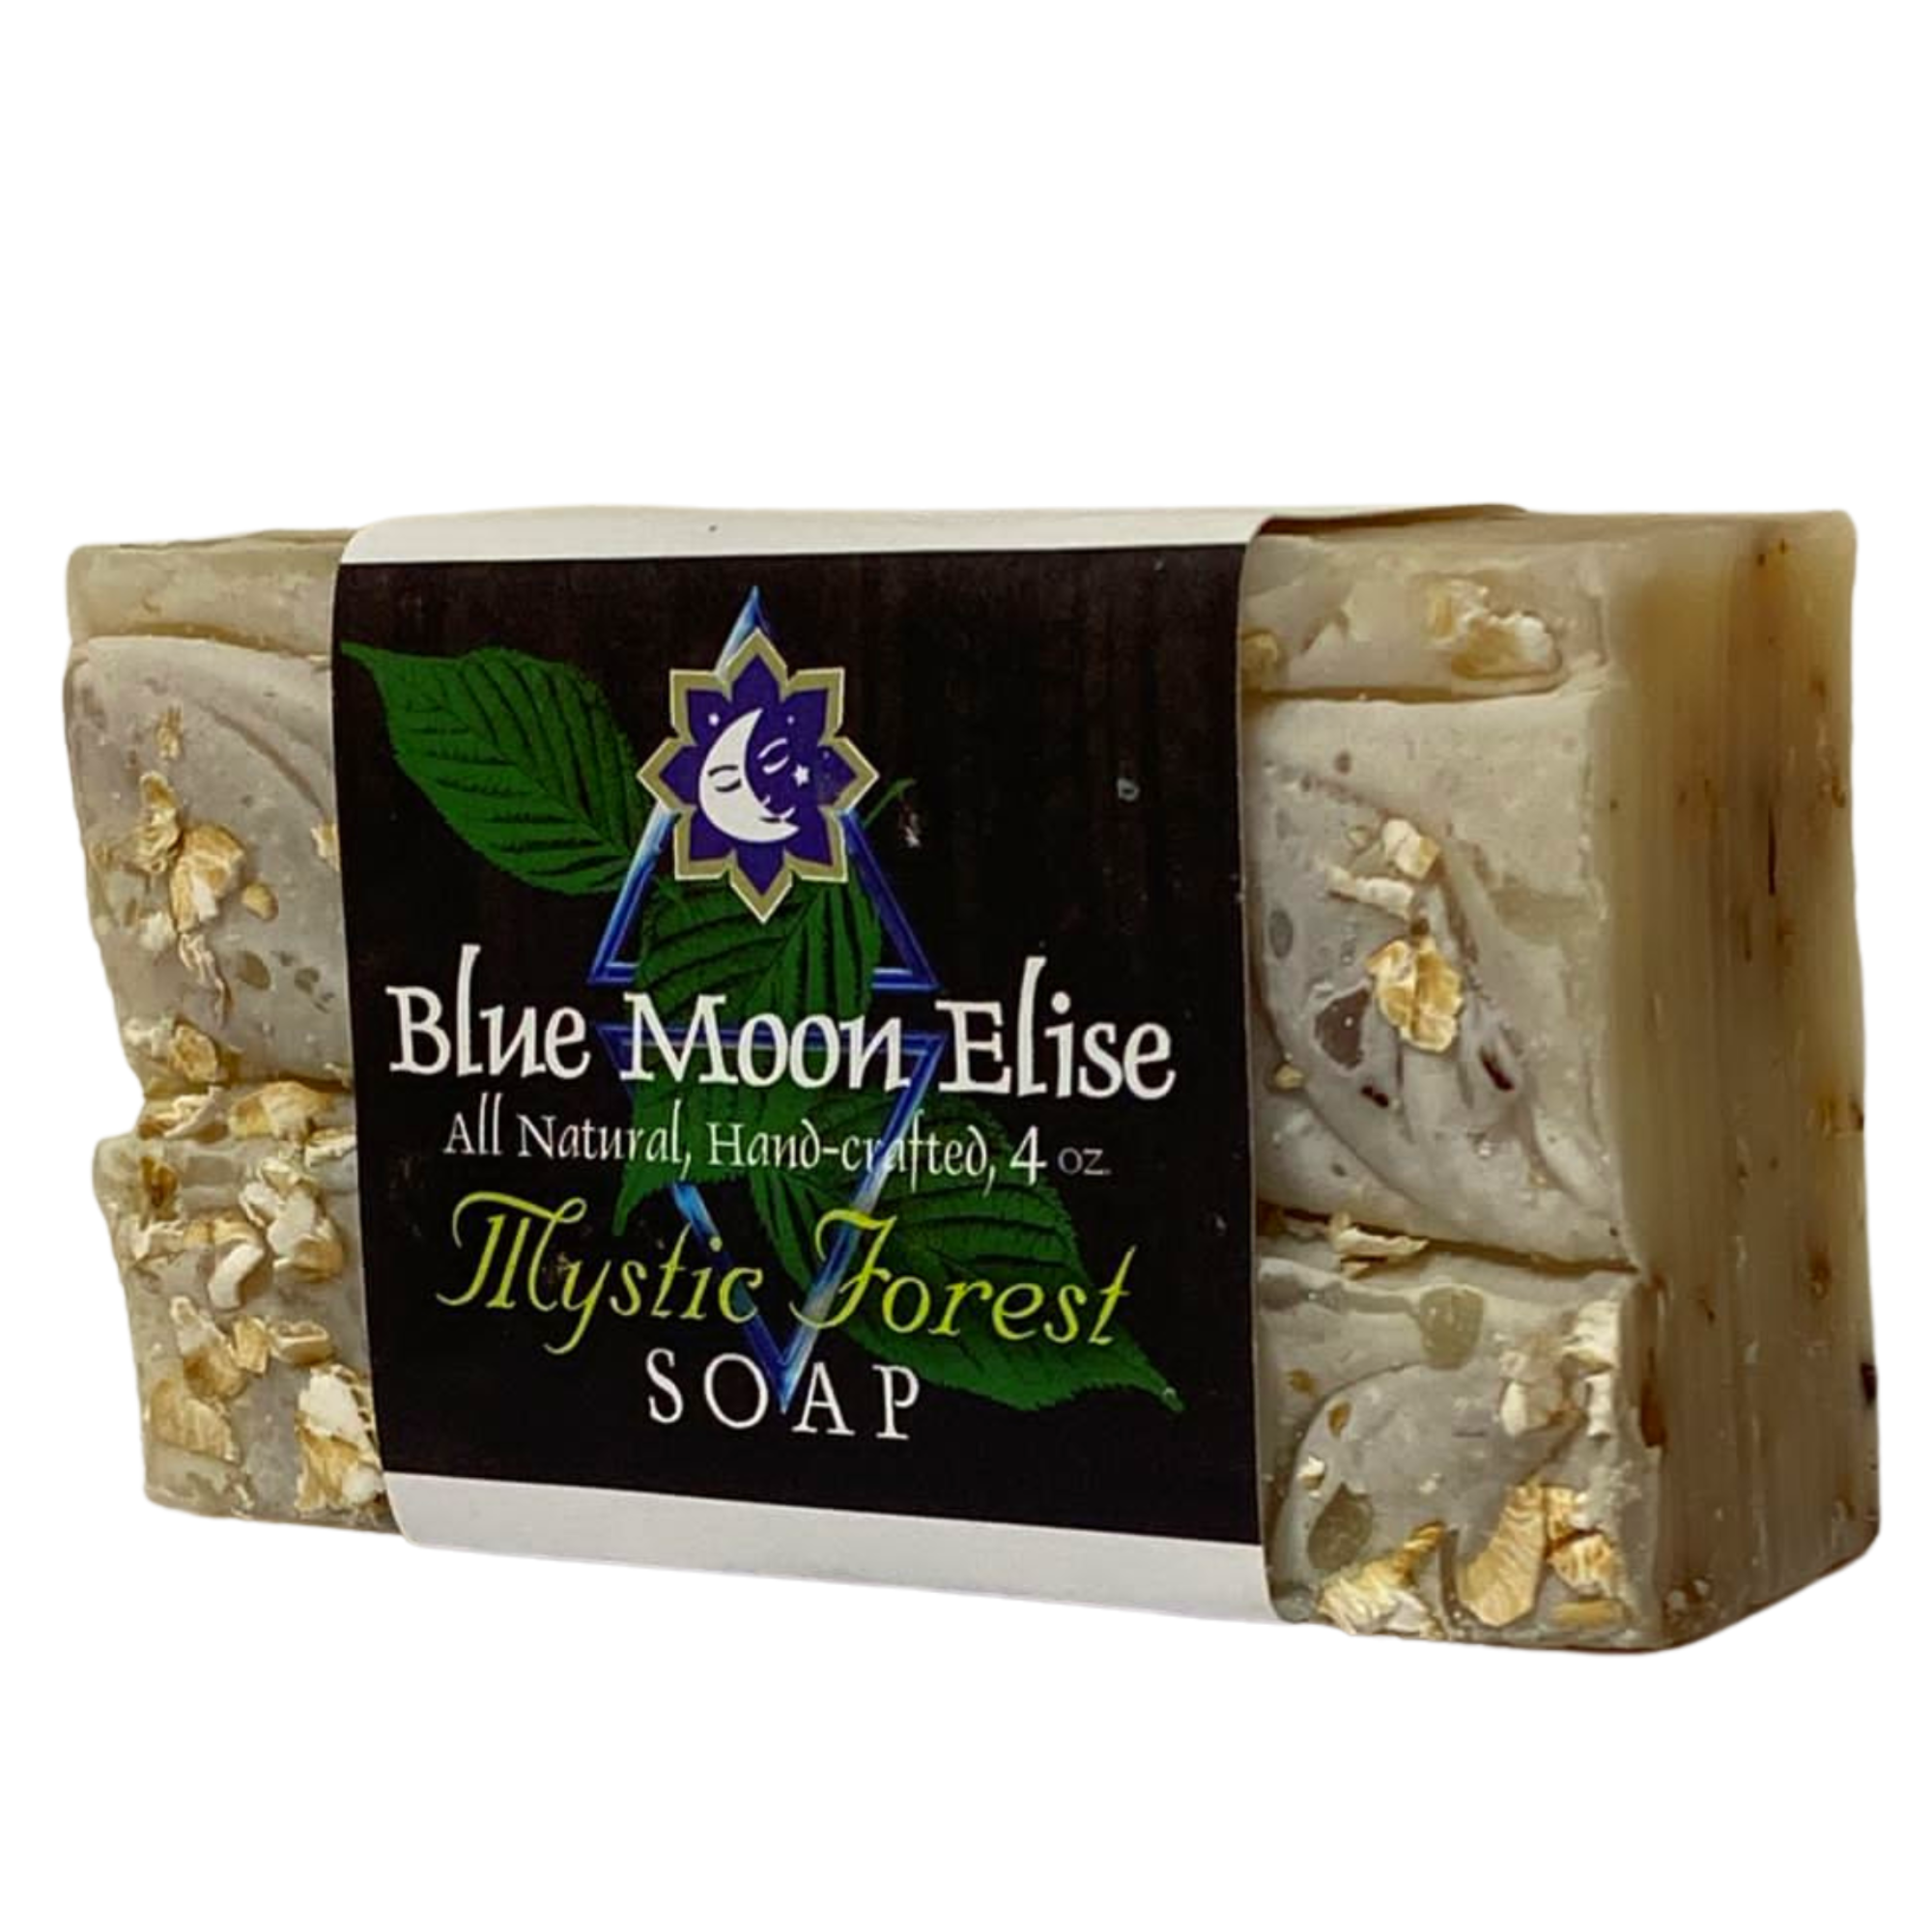 Mystic Forest Soap